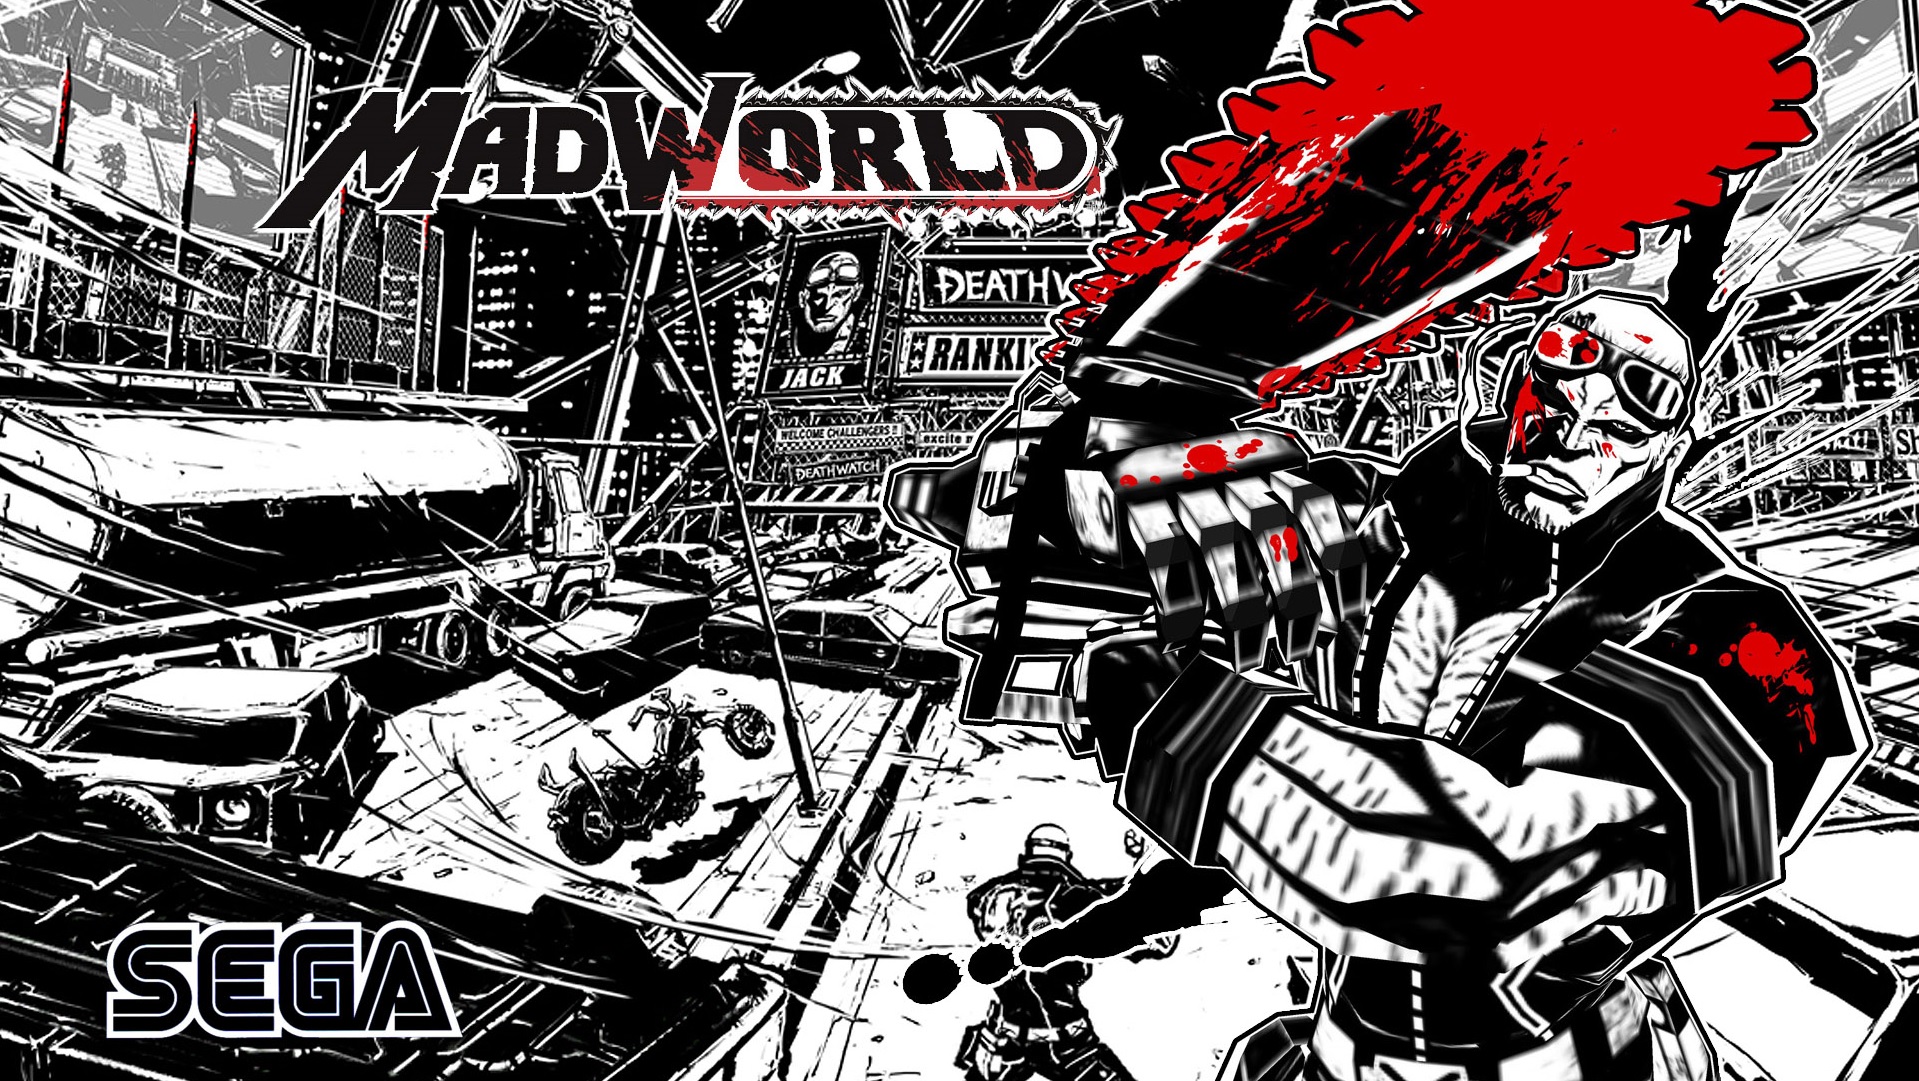 Petition · Madworld wii remake for newer consoles ·